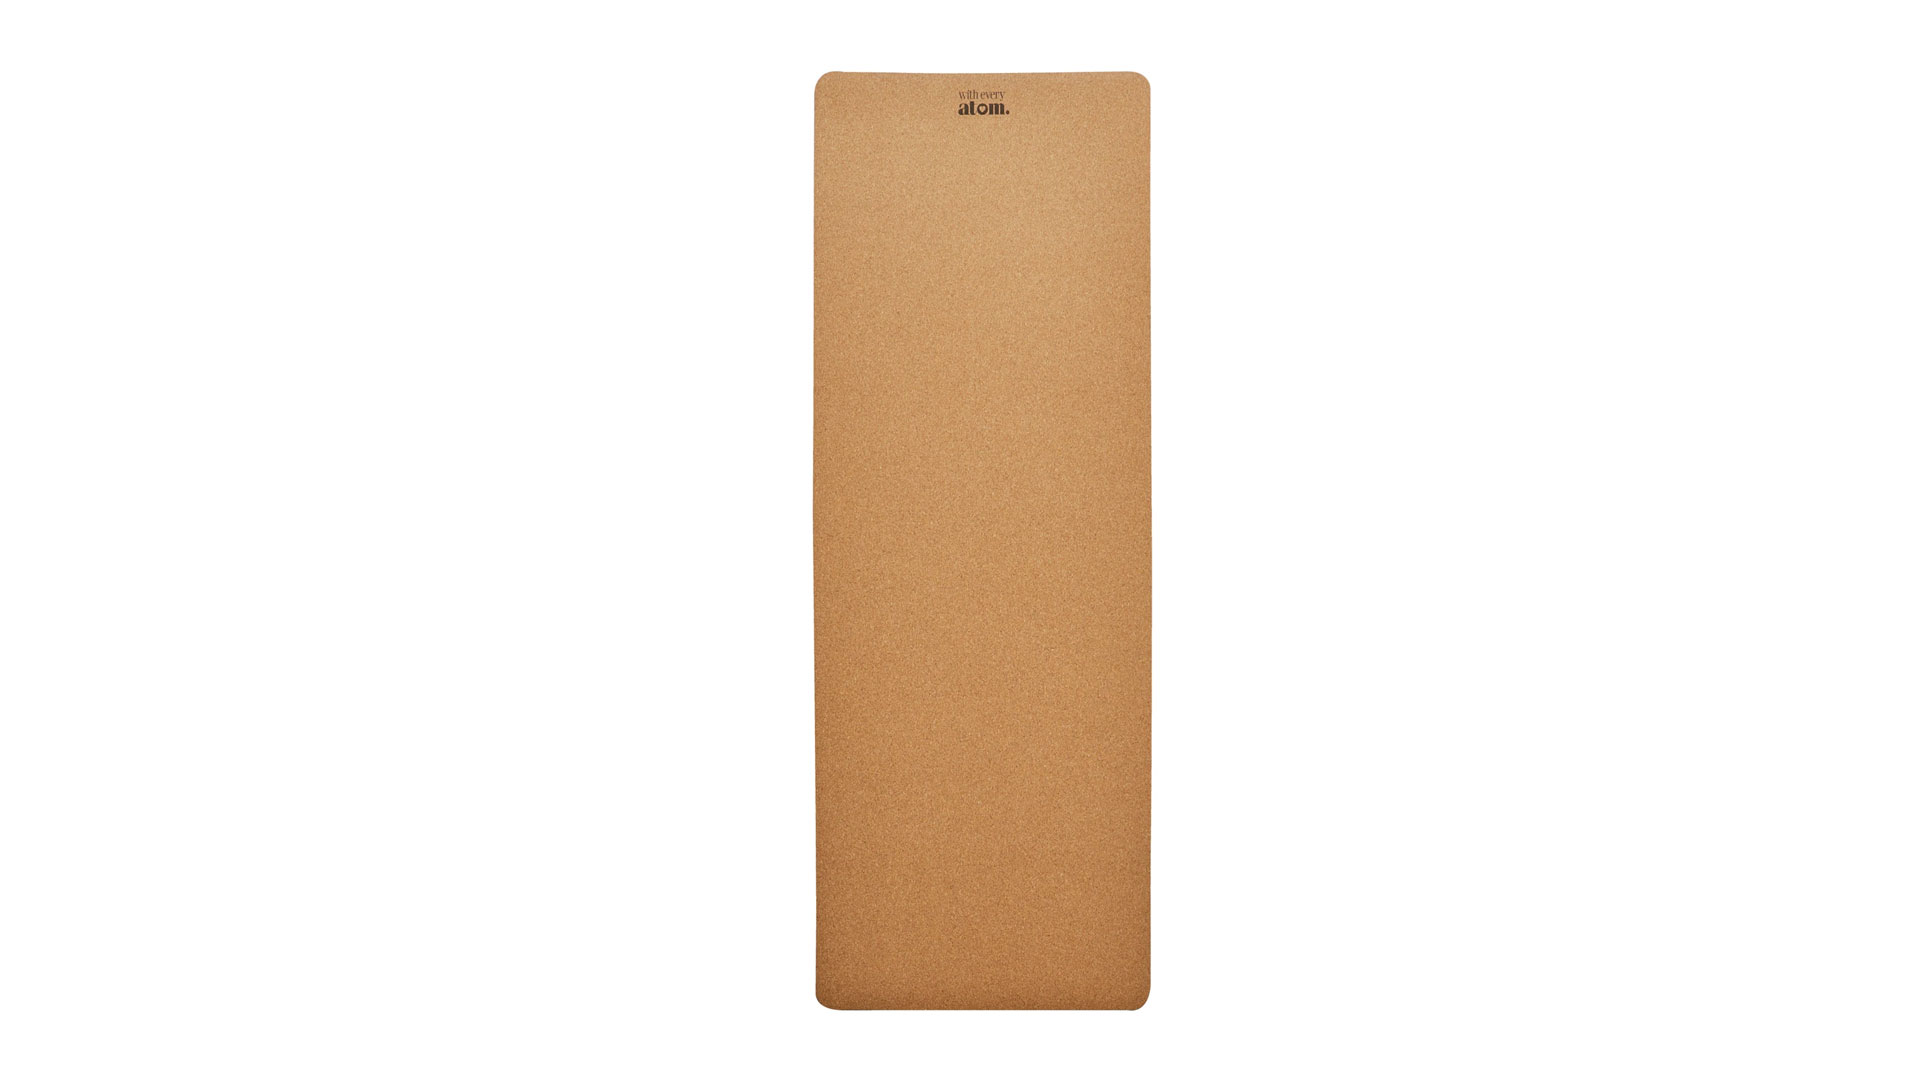 Best yoga Mats: image shows With Every Atom Cork Yoga Mat